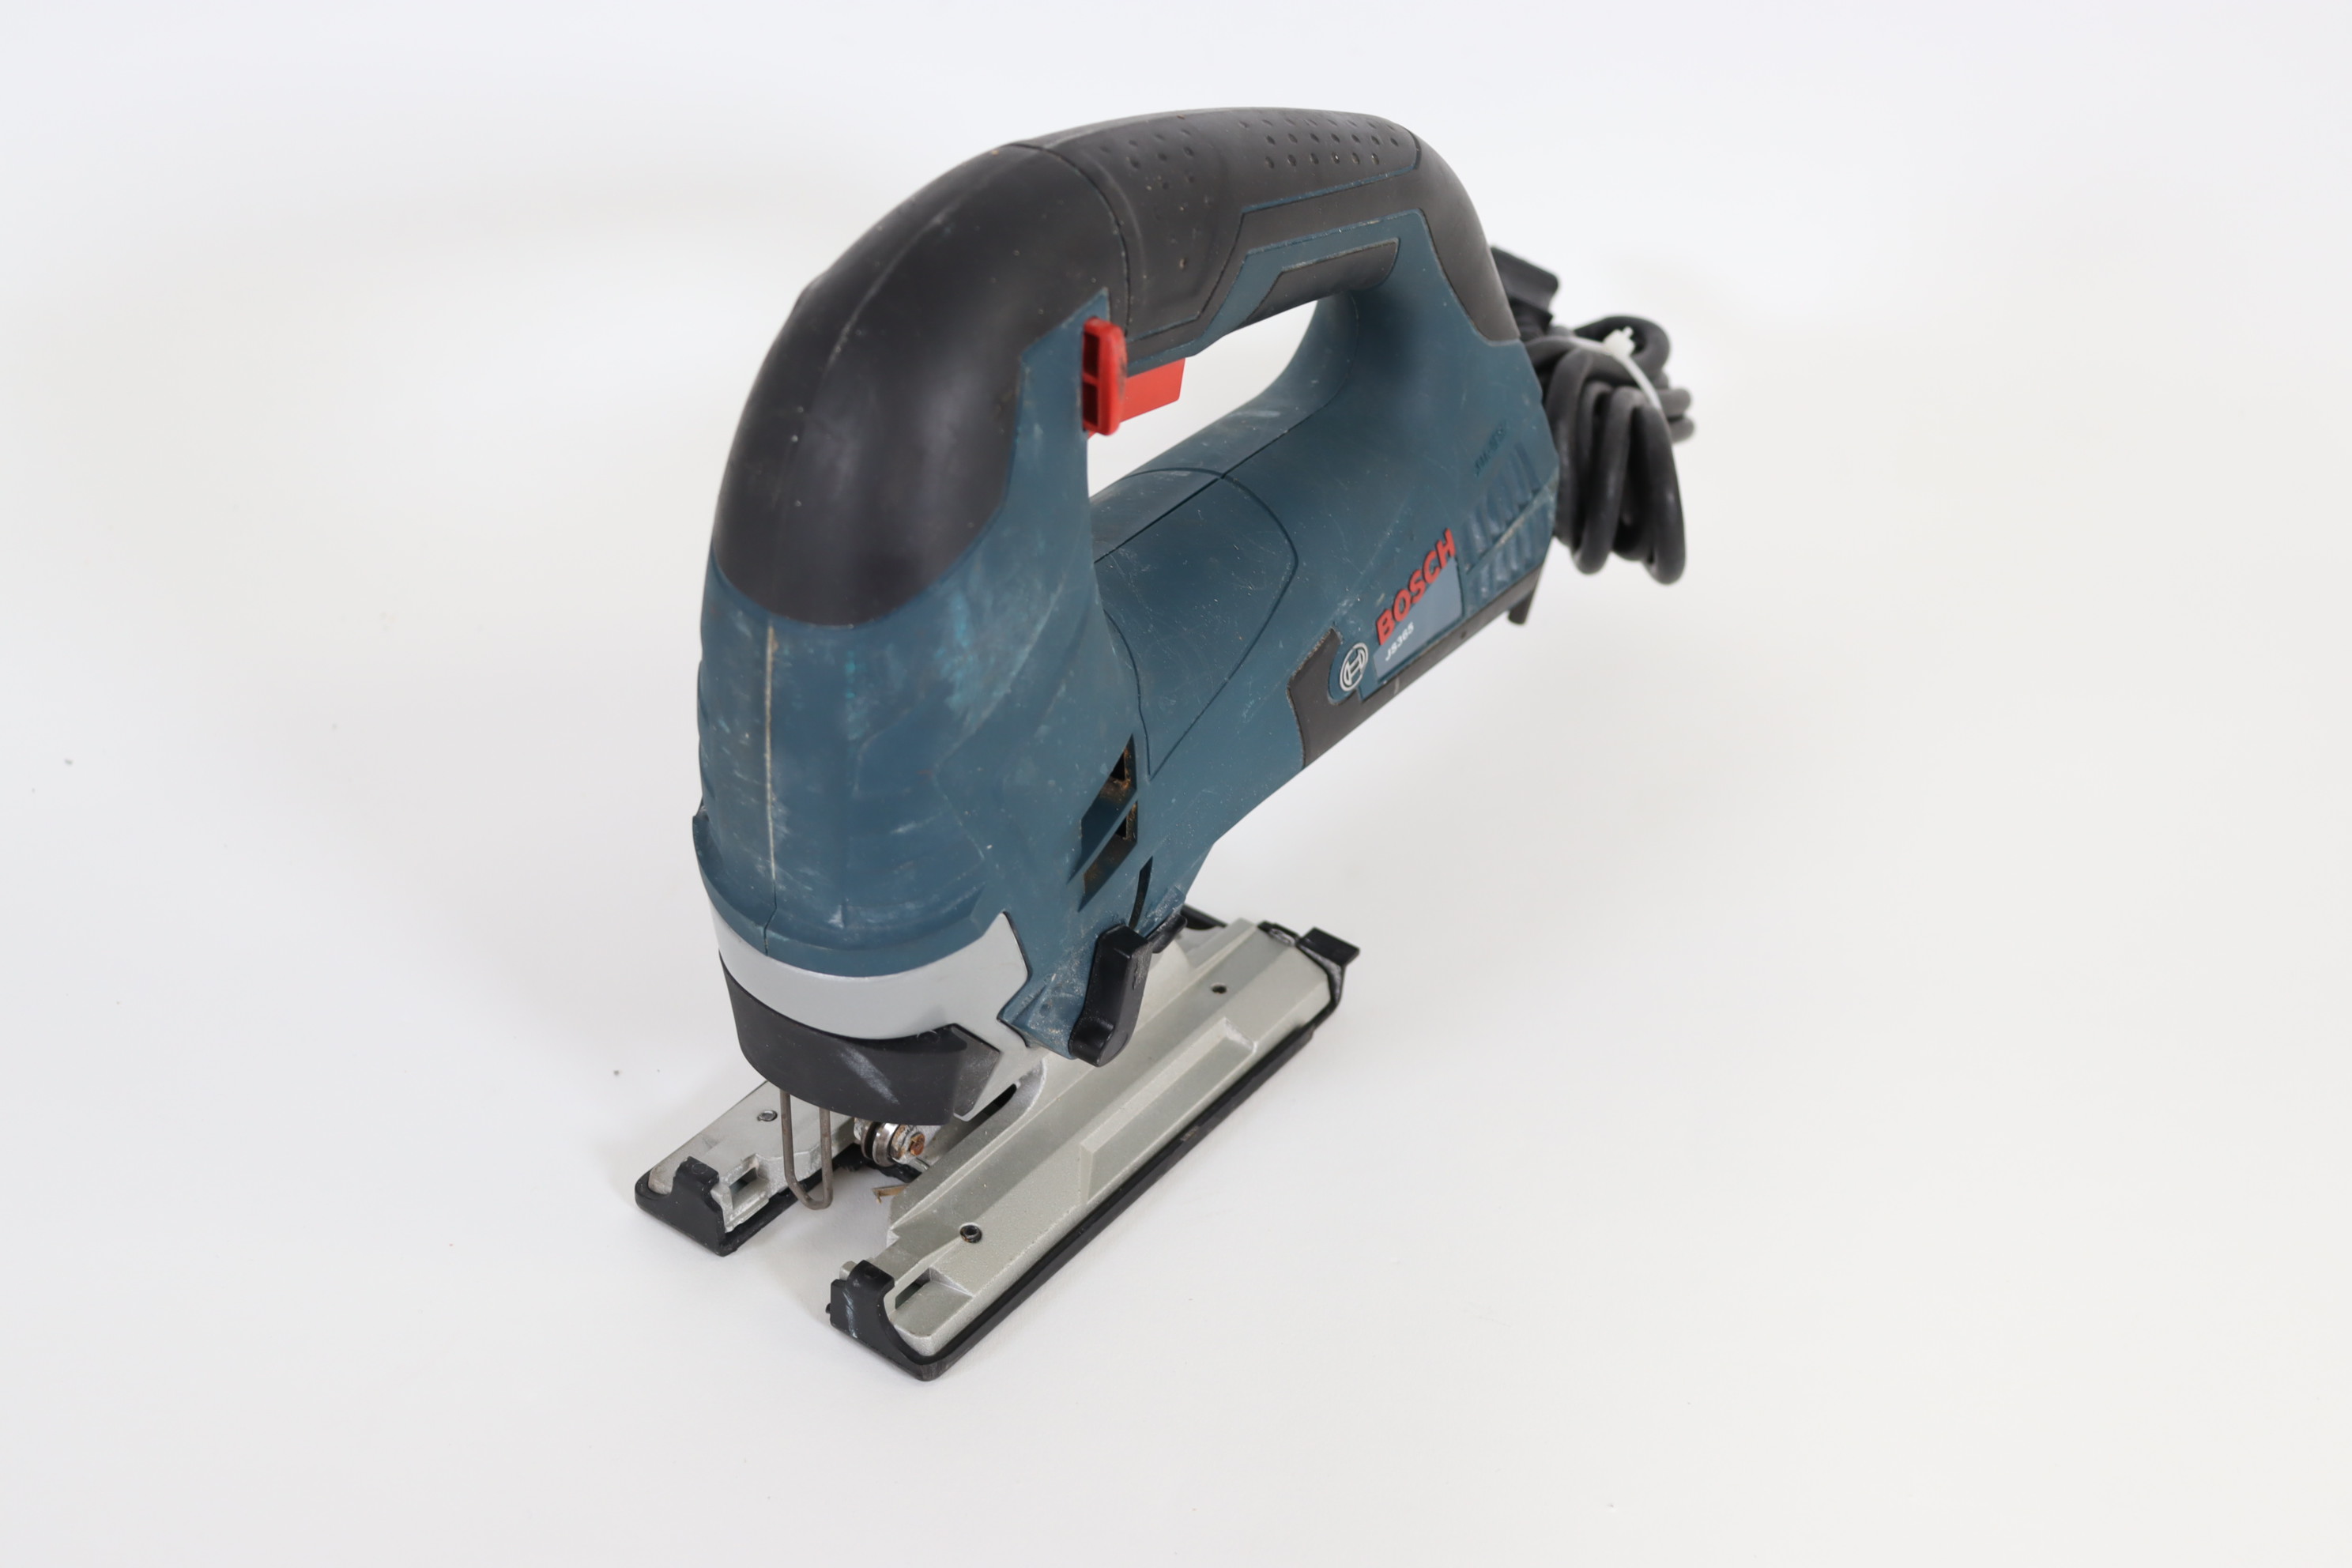 Bosch JS365 120V 6.5 Amp Corded Variable Speed Top-Handle Jig Saw